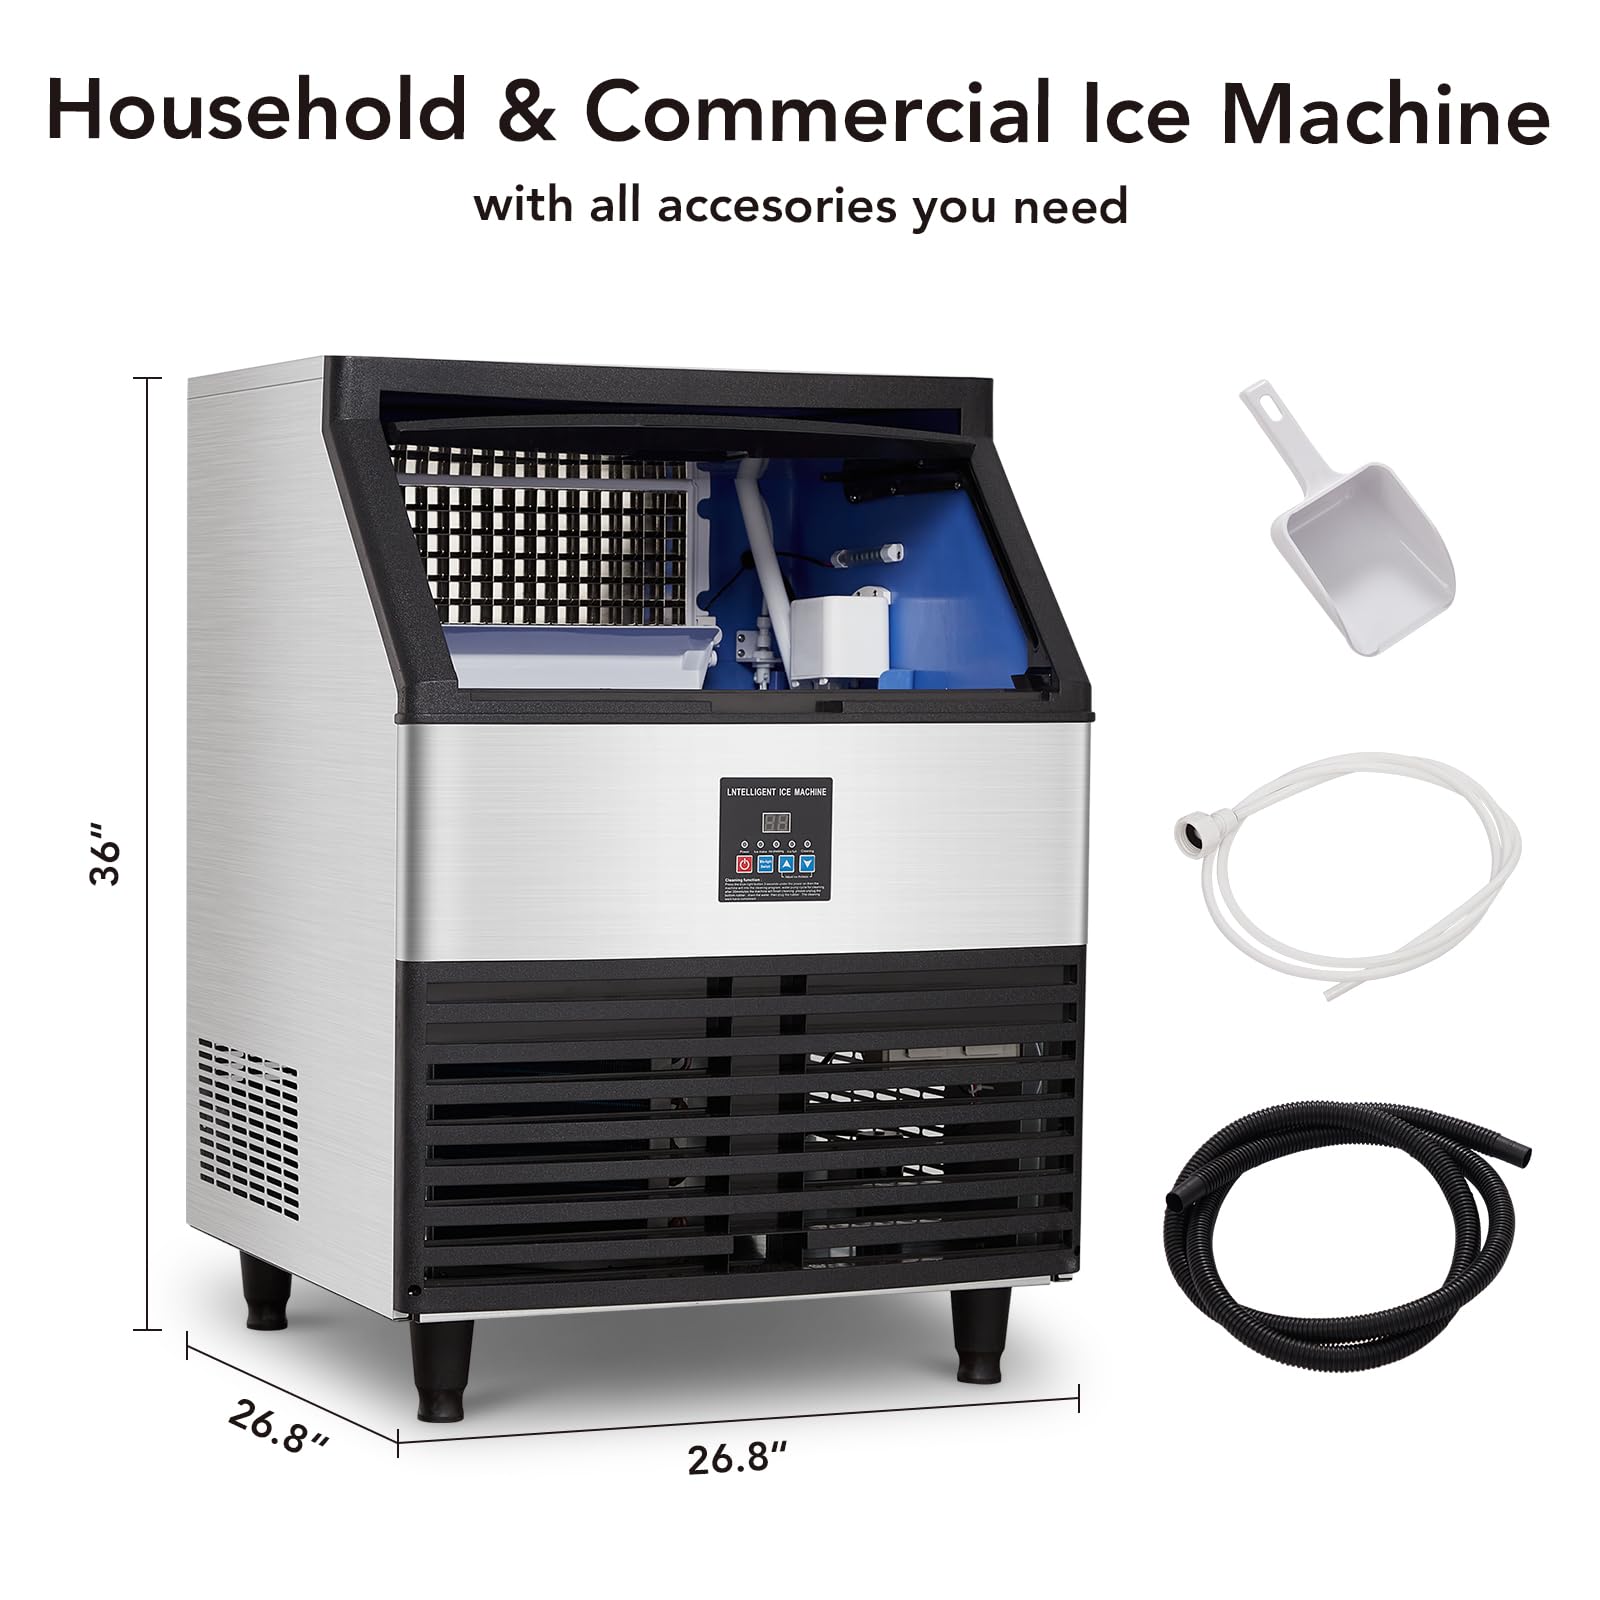 GARVEE 440lbs/24H Commercial Ice Maker Machine Stainless Steel Under Counter ice Machine with 88lbs Storage Freestanding Ice Maker for Home Business